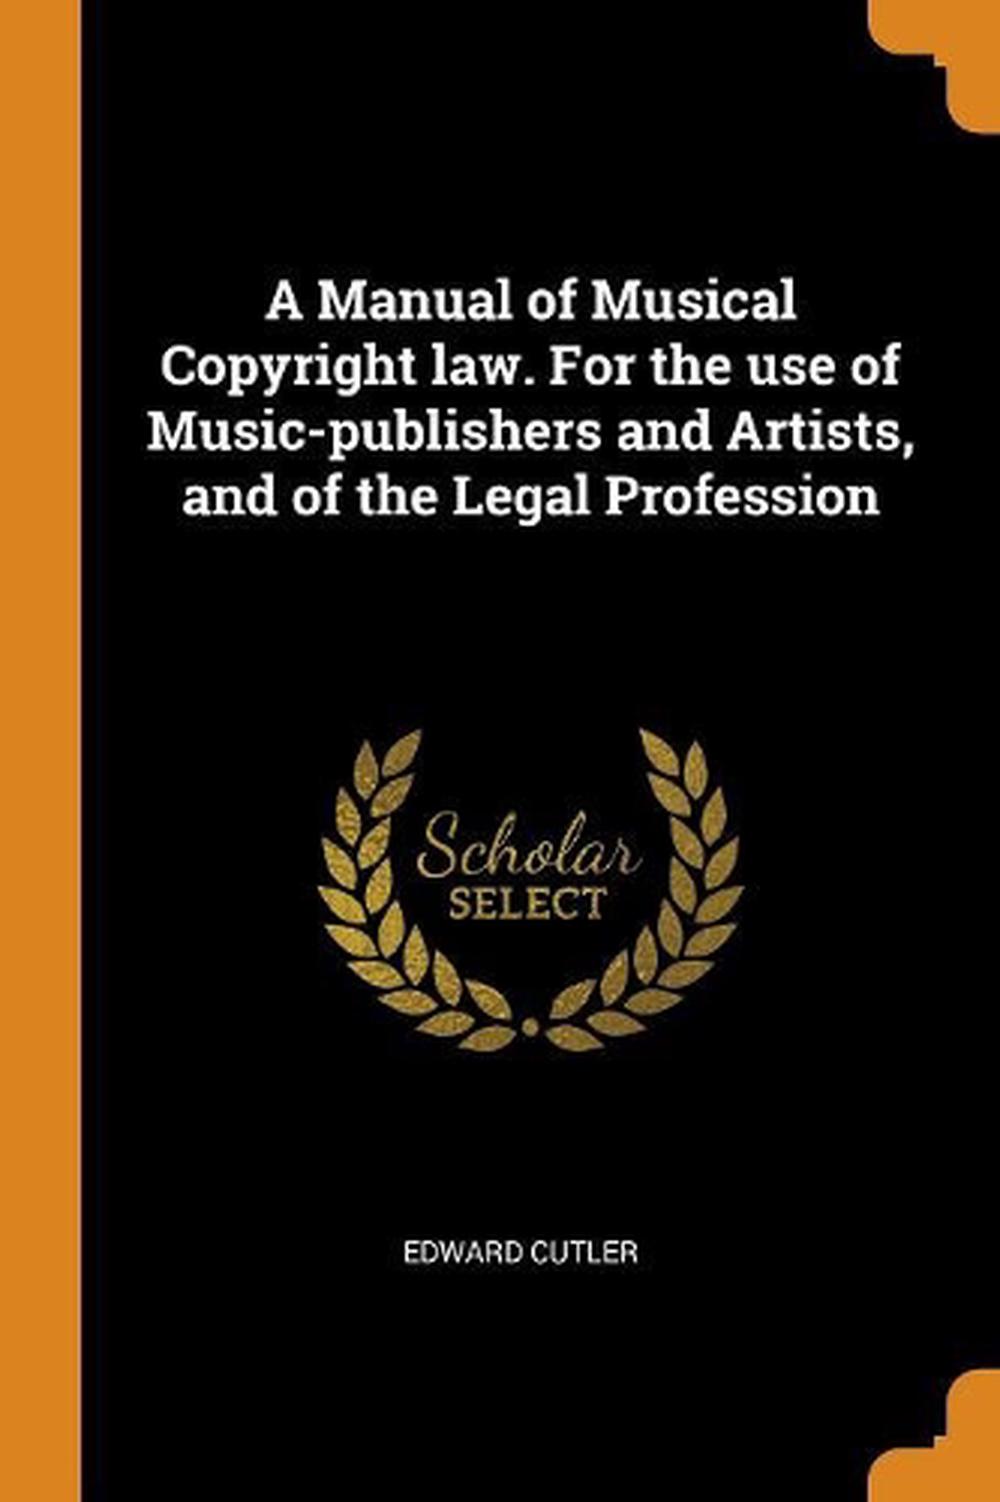 copyright registration for musical compositions